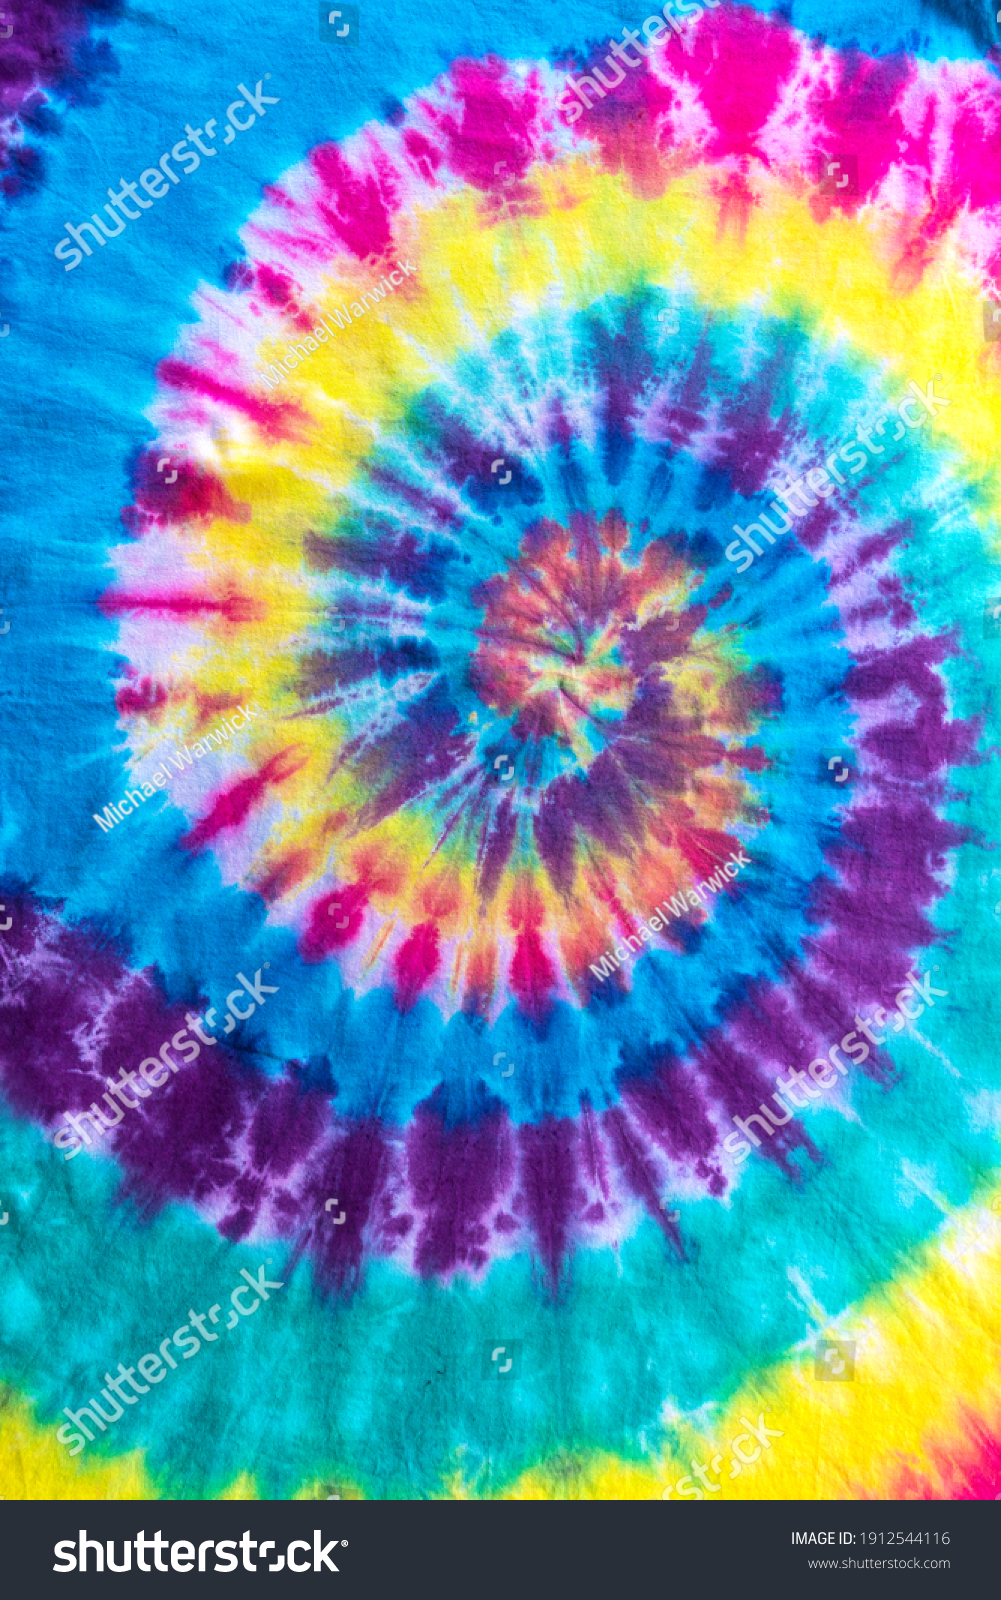 Fashionable Pastel Blue, Yellow Red, Green, Purple Retro Abstract Psychedelic Tie Dye Swirl Design. #1912544116